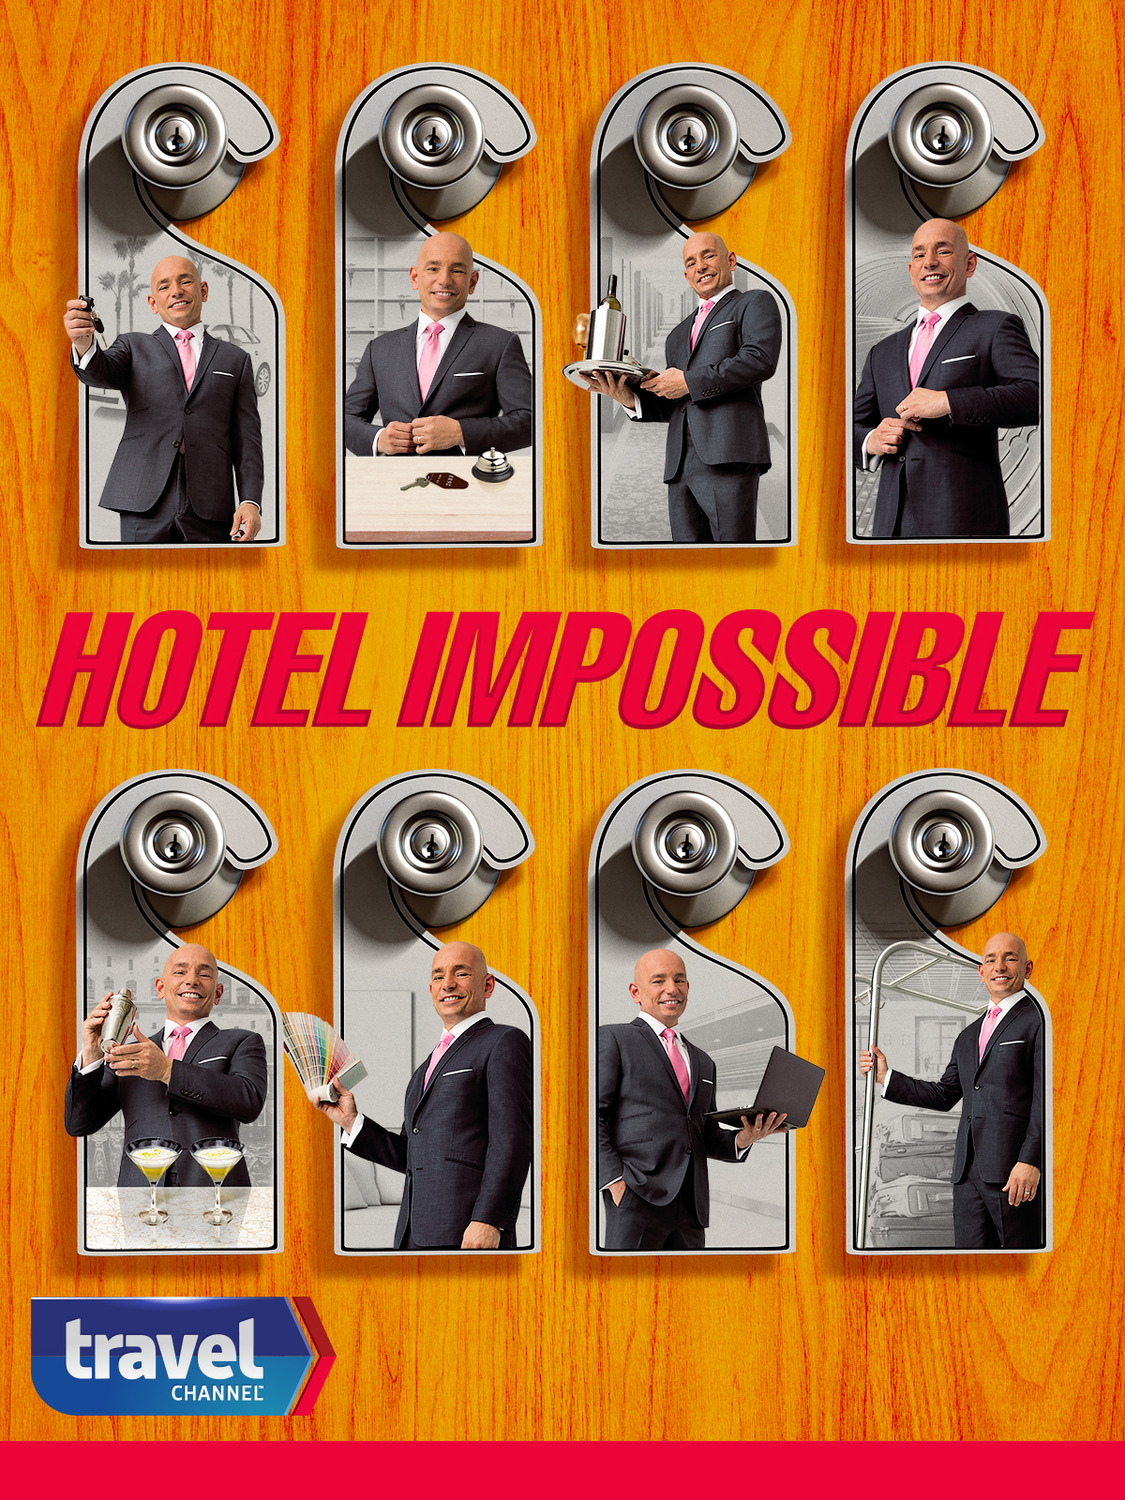 Extra Large TV Poster Image for Hotel Impossible (#5 of 6)